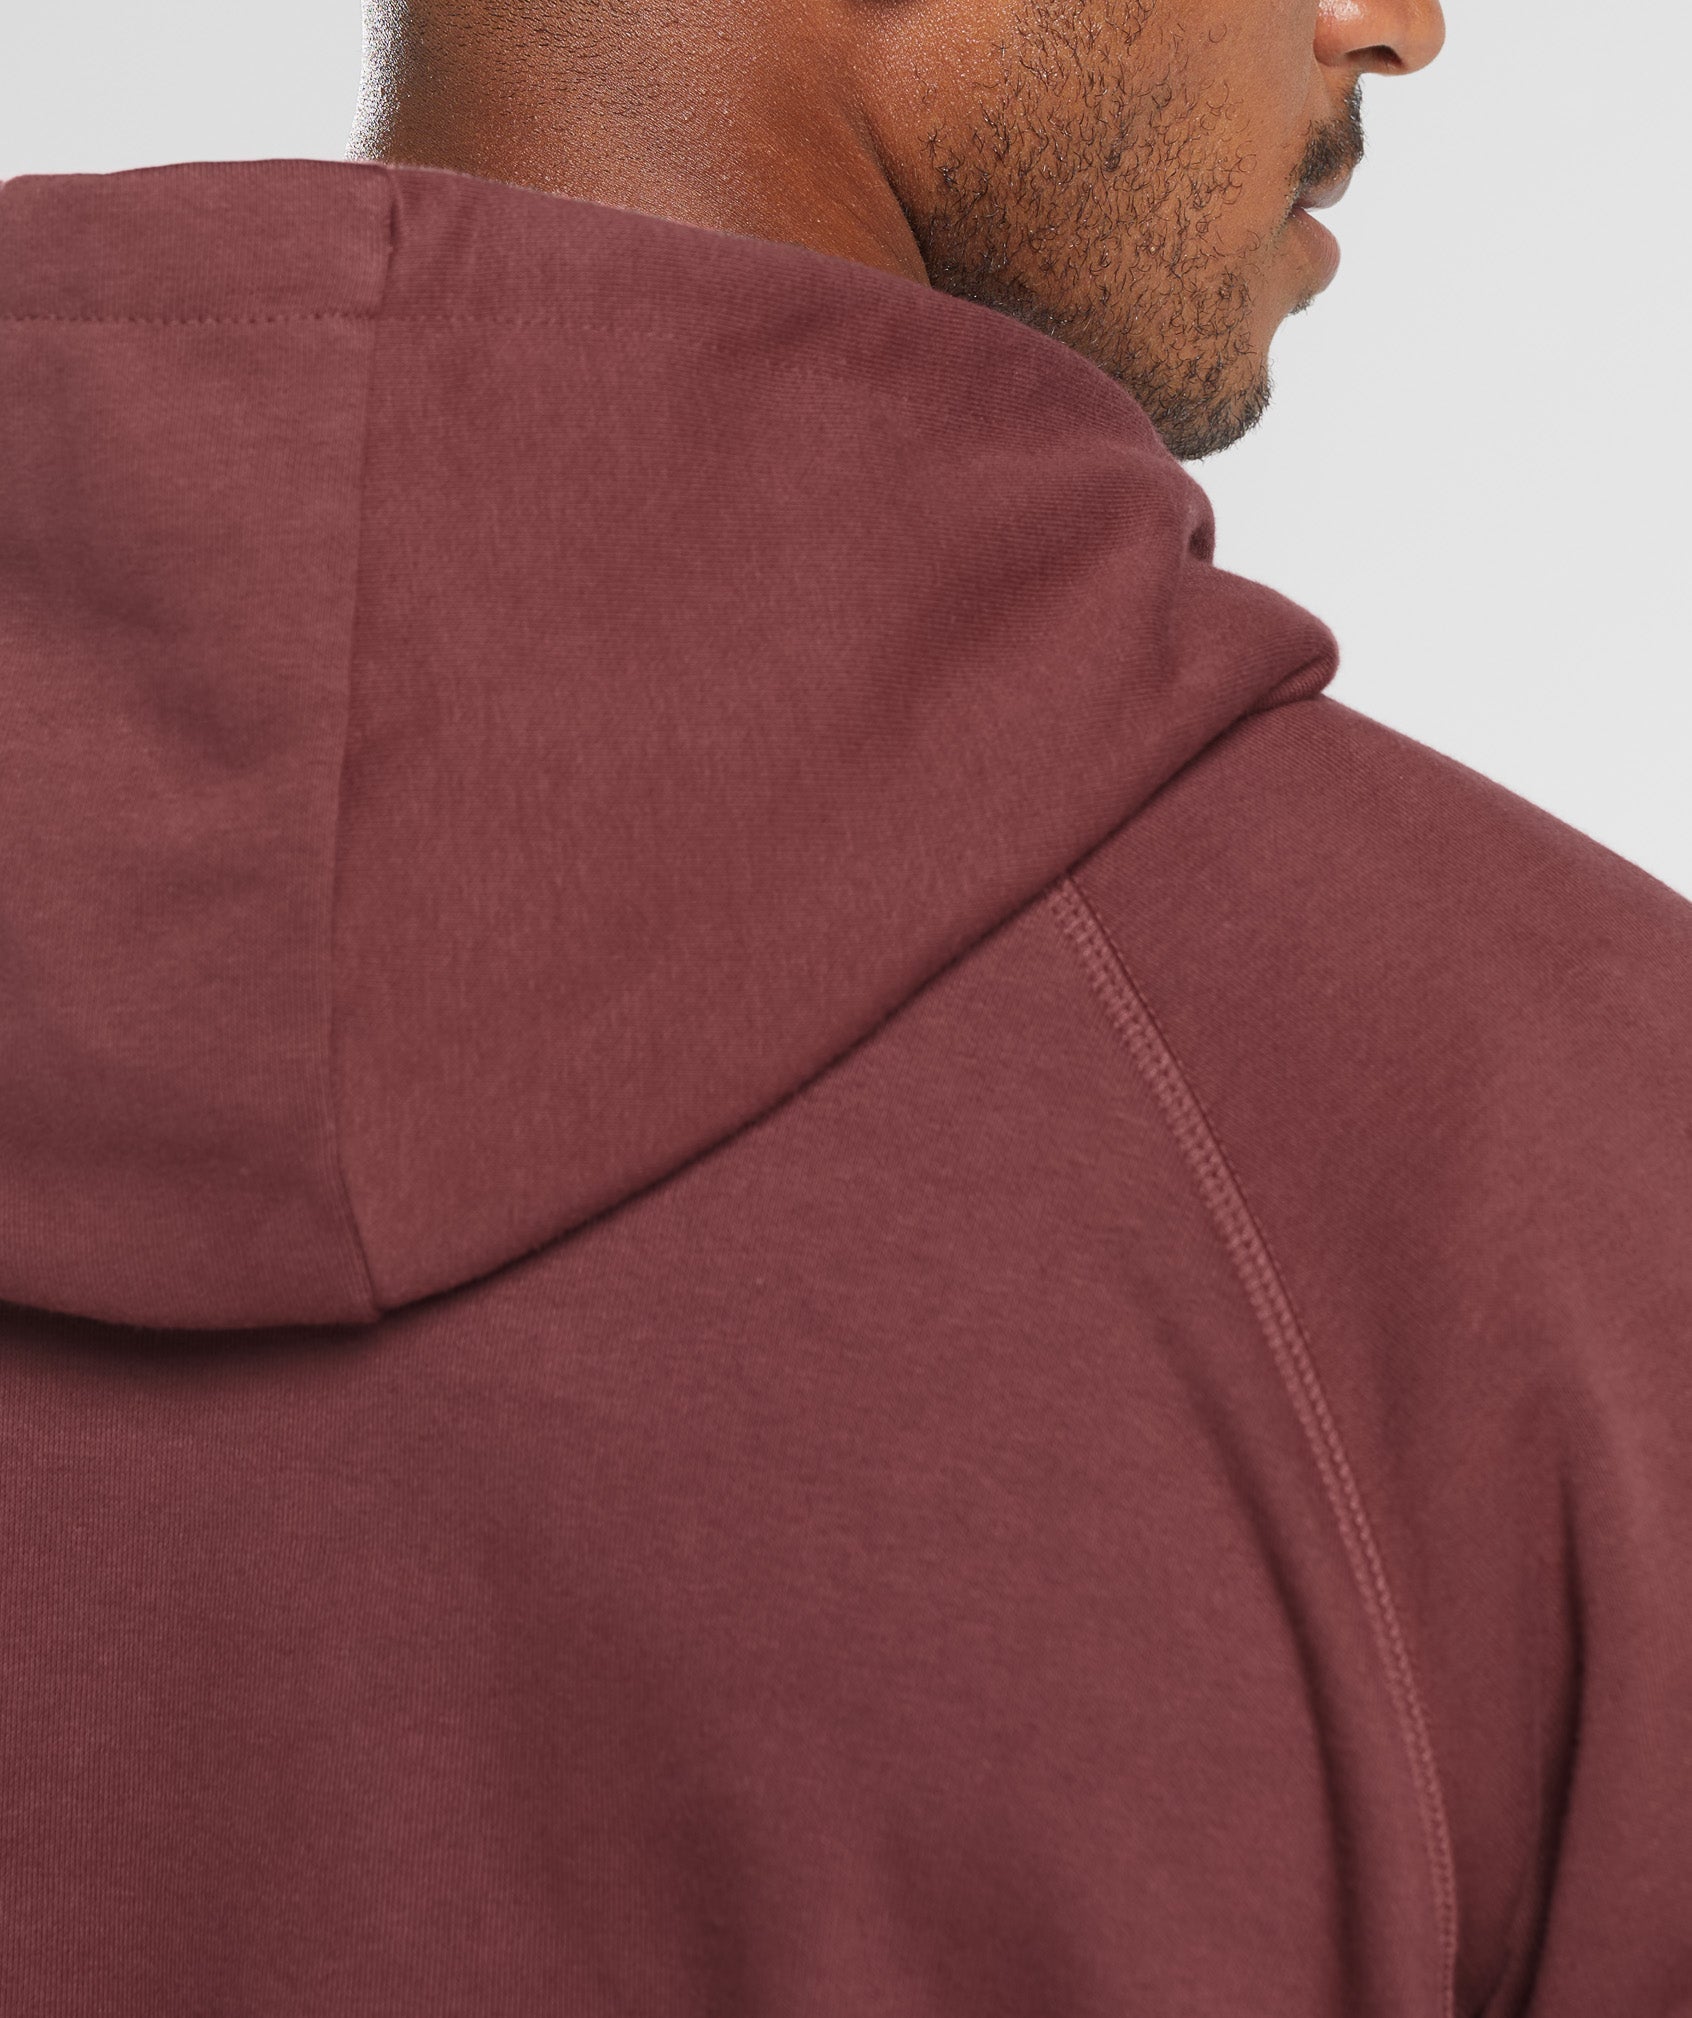 Crest Hoodie in Washed Burgundy - view 5